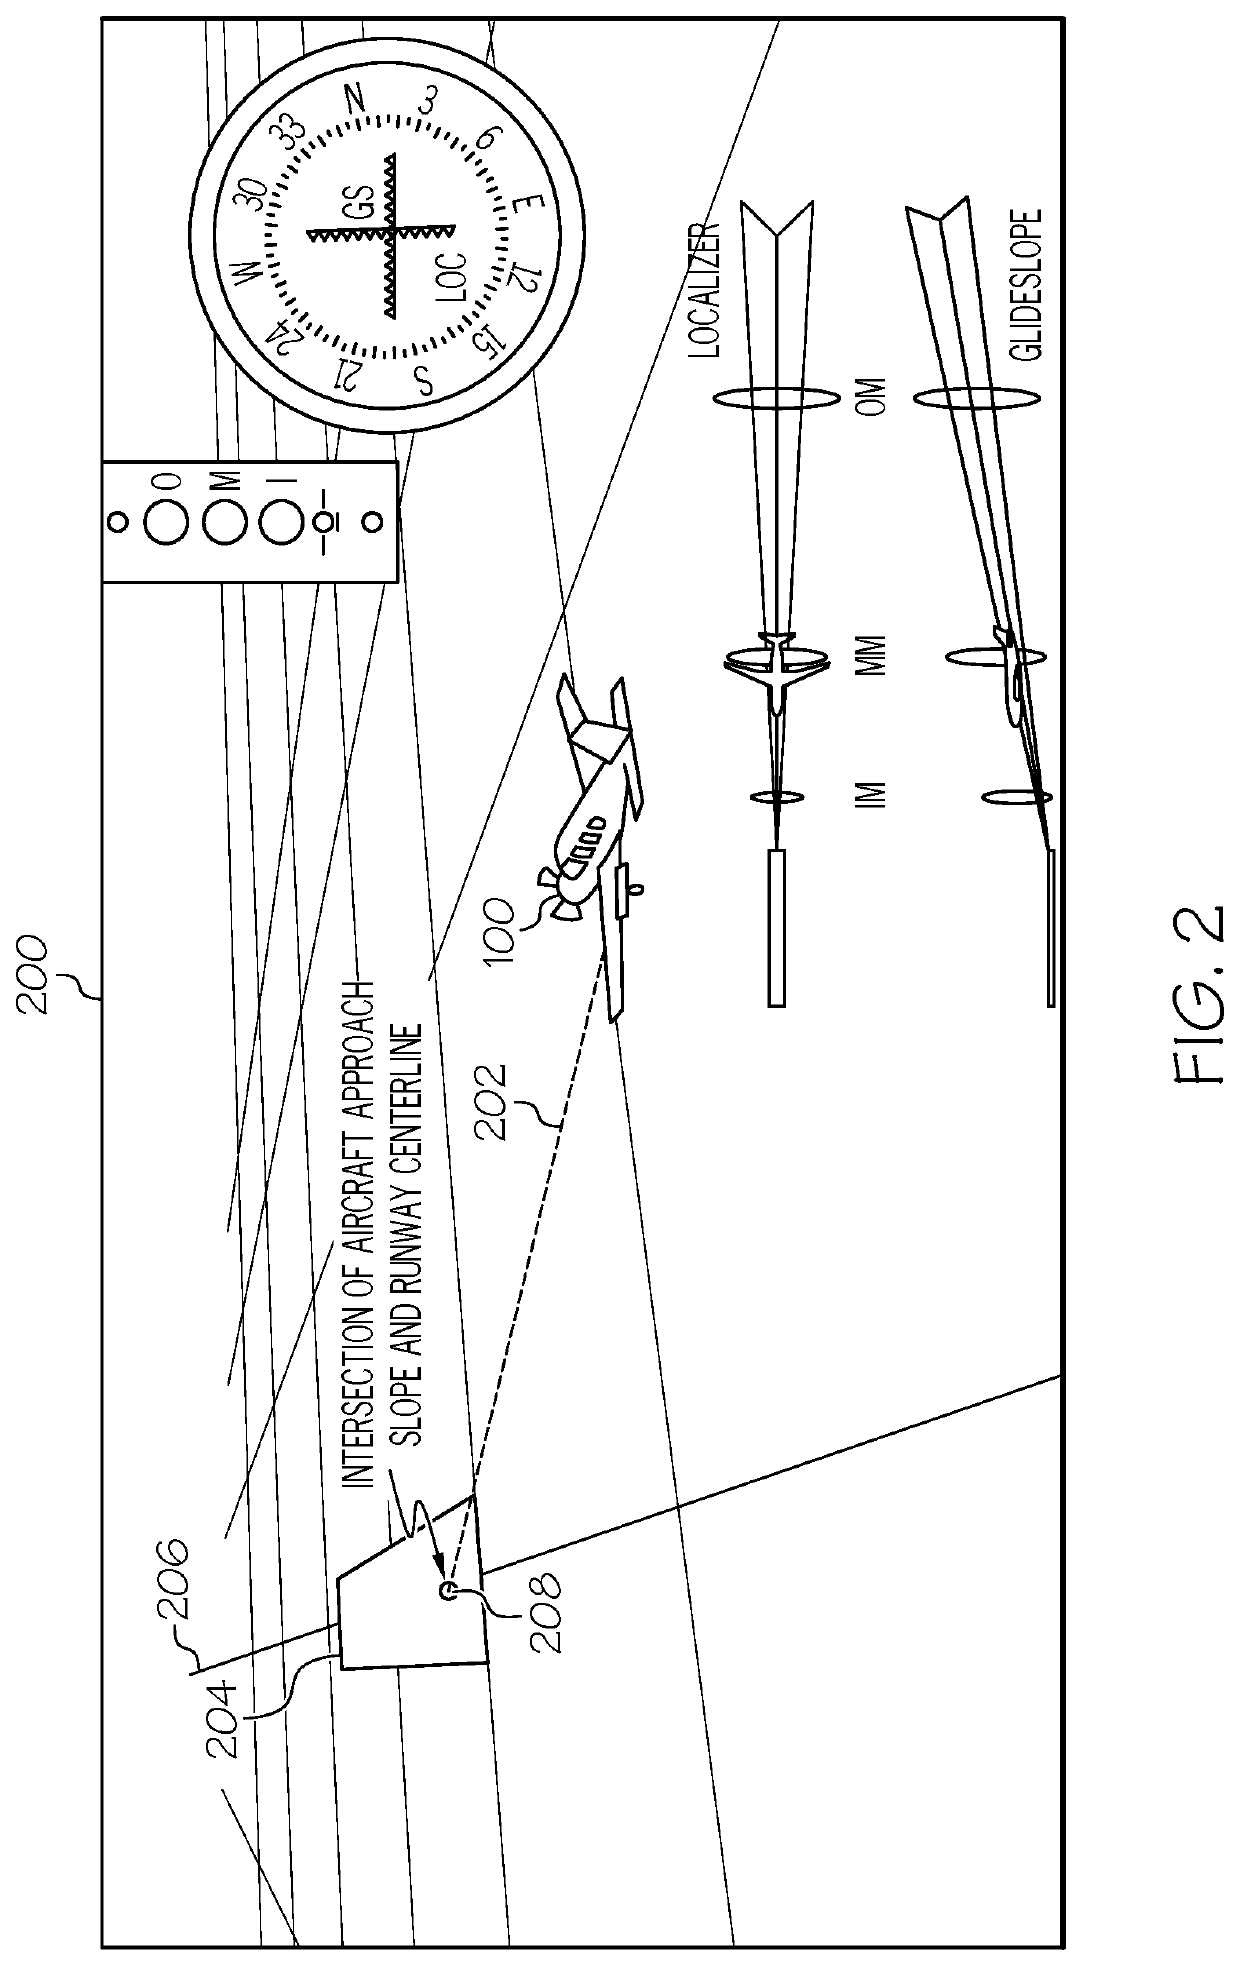 Systems and methods for selecting accurate runway records for use in cockpit display systems